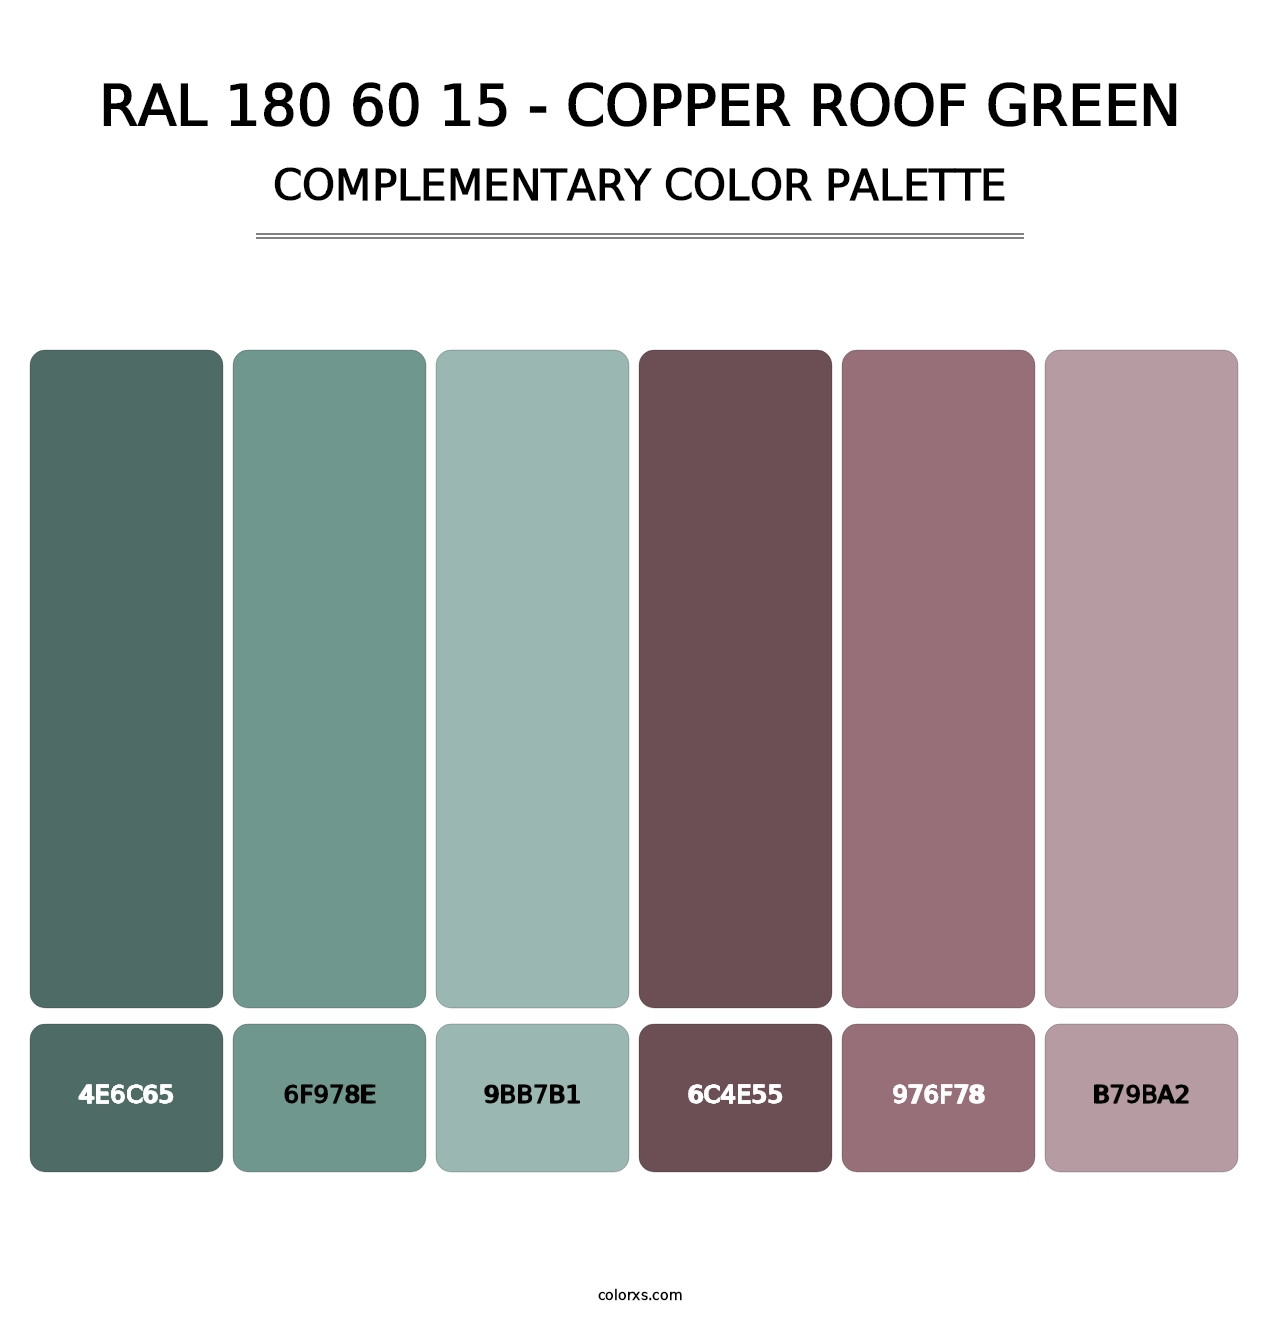 RAL 180 60 15 - Copper Roof Green - Complementary Color Palette